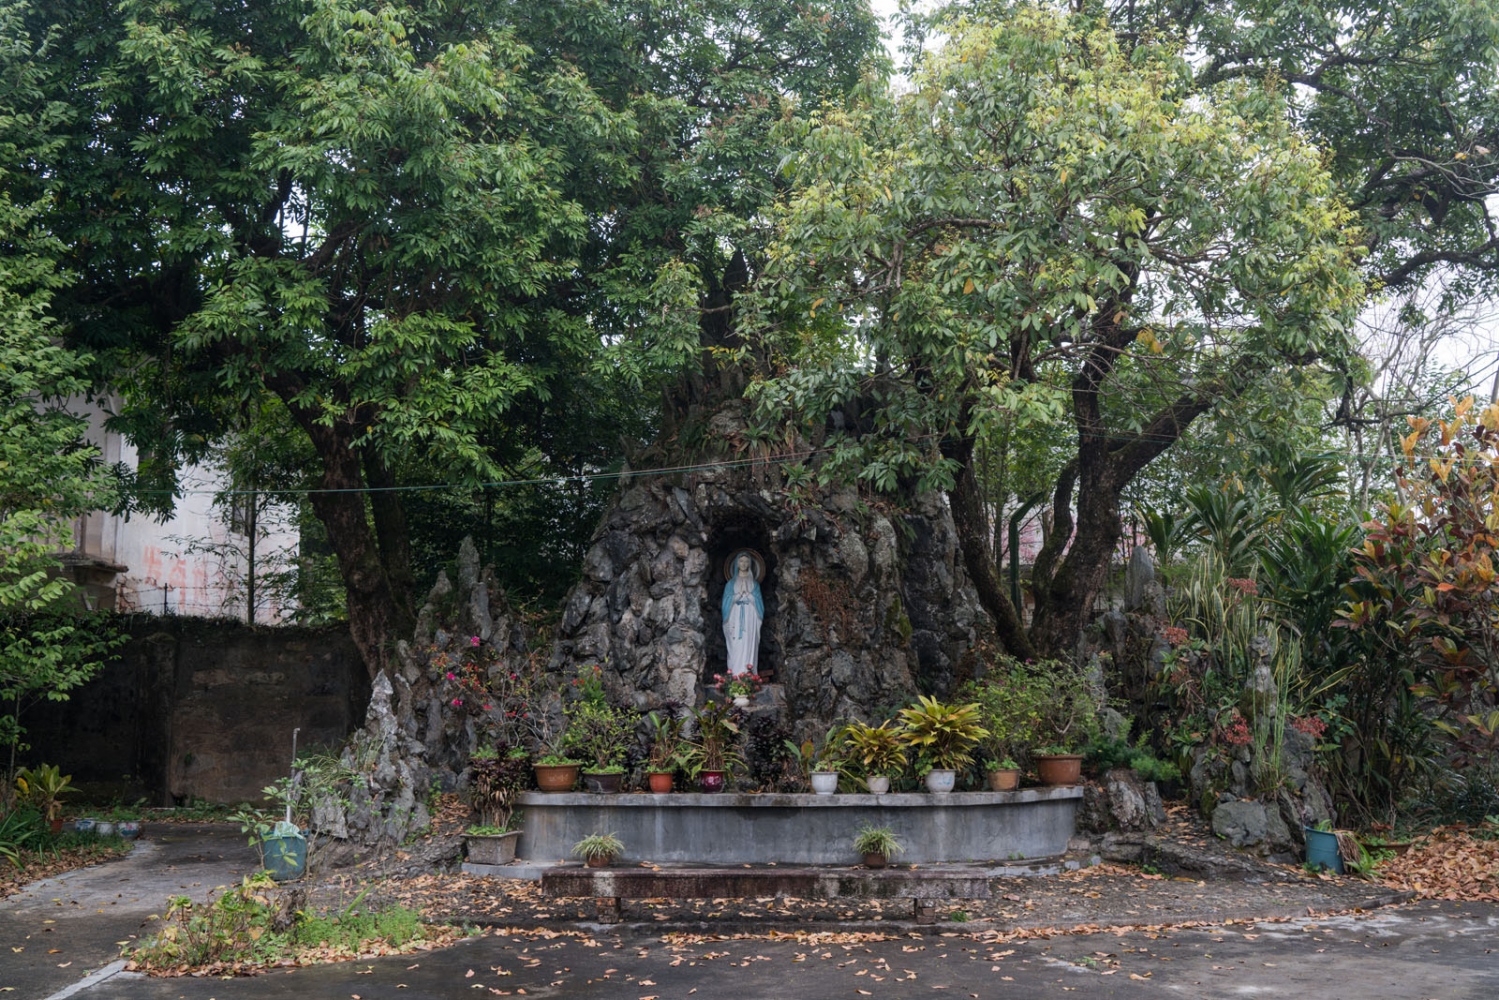 A Rural Chinese Catholic Village - A Mary statue stands in the courtyard of Luotianba Church...